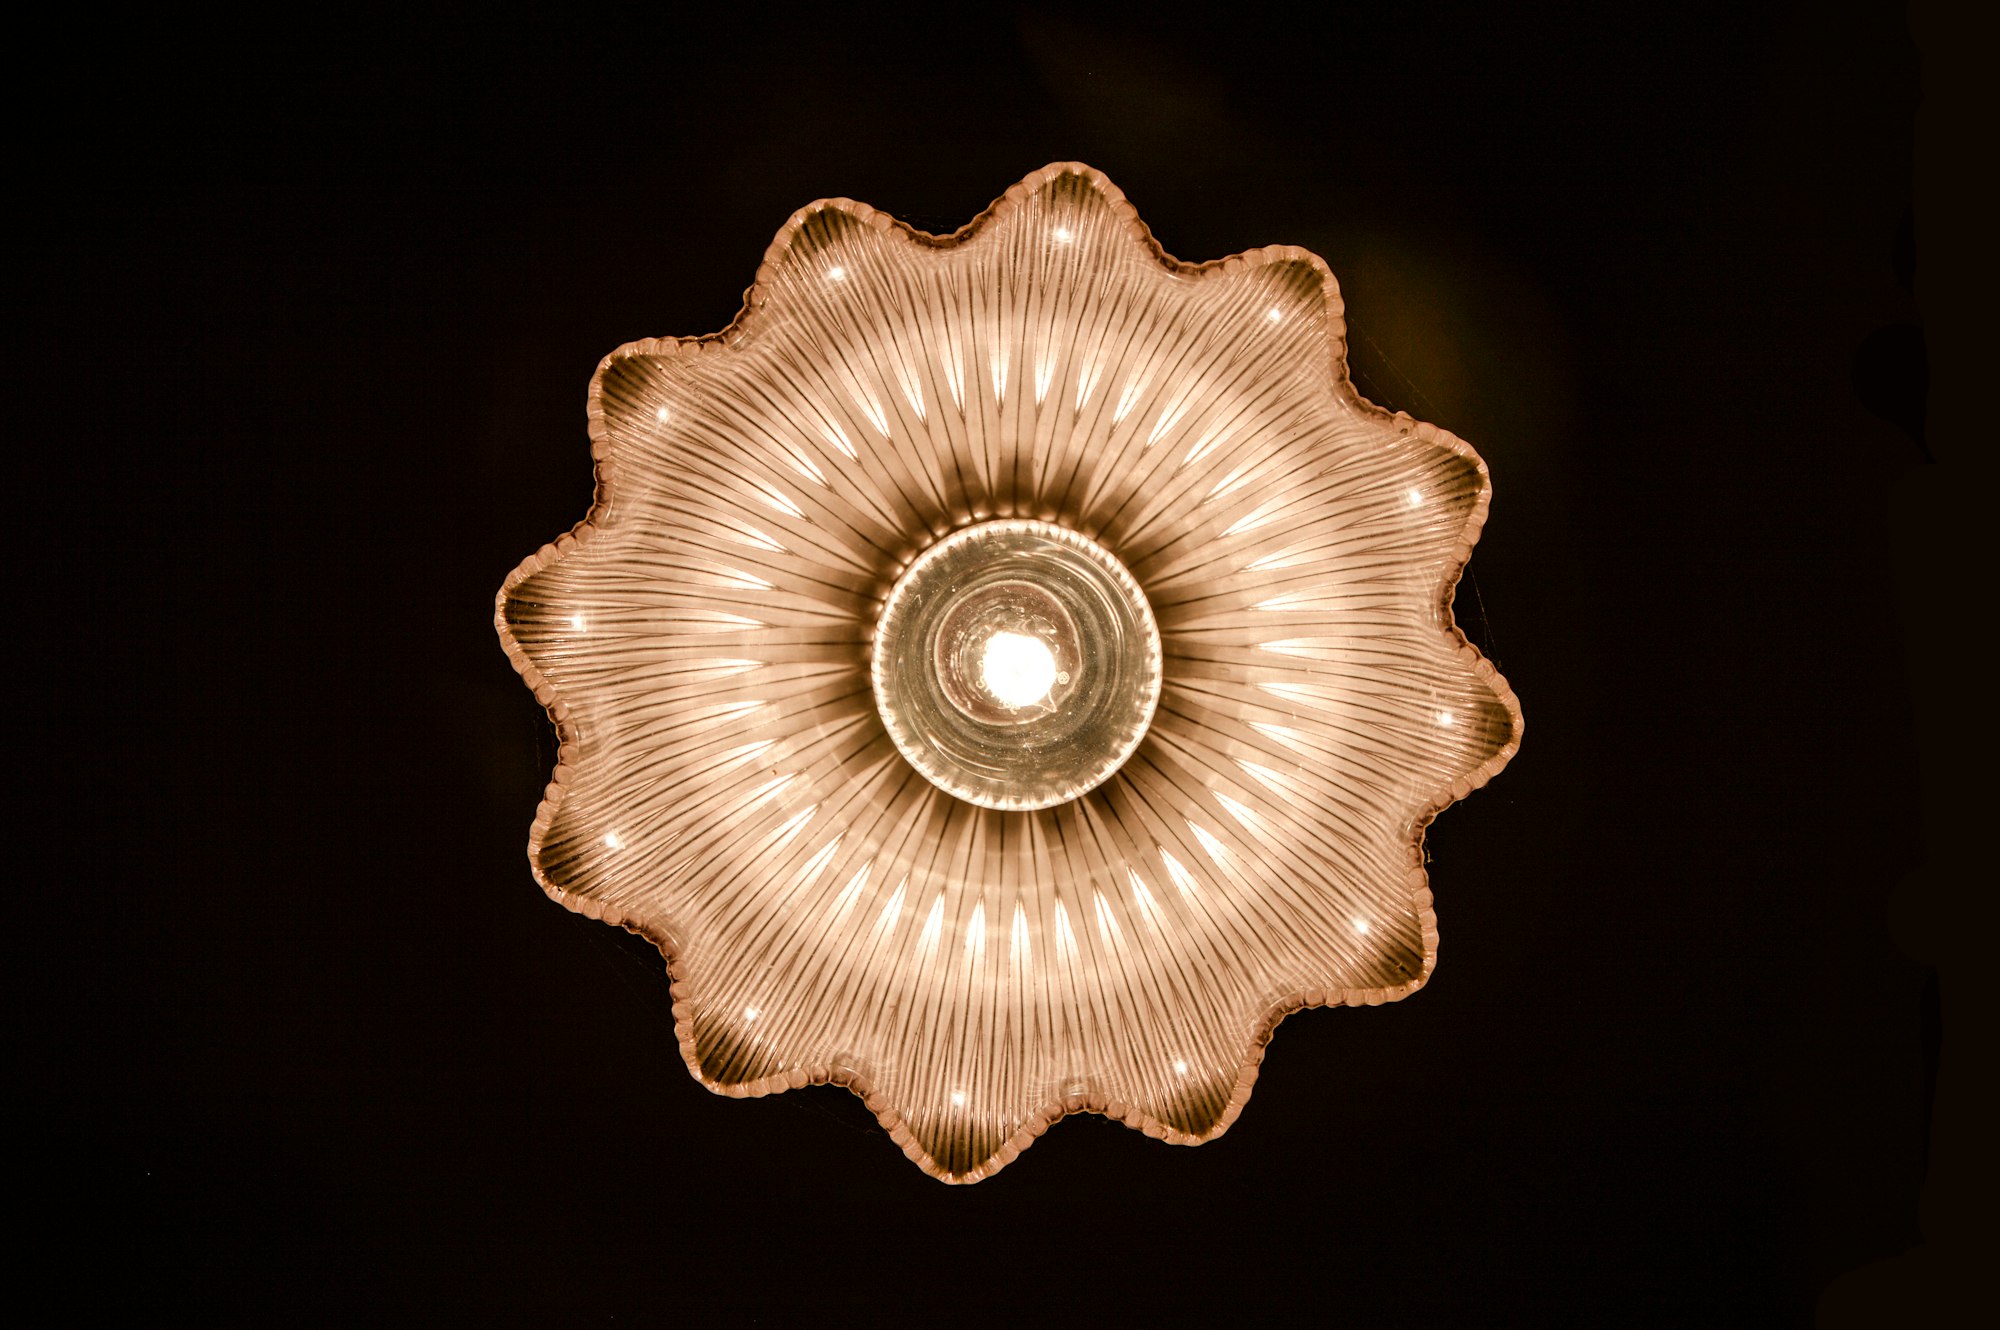 Glass light shade has beautiful symmetry and reflections when viewed from below. The prismatic ridges in the vintage shade make a display of glowing petals as the light travels through it. 